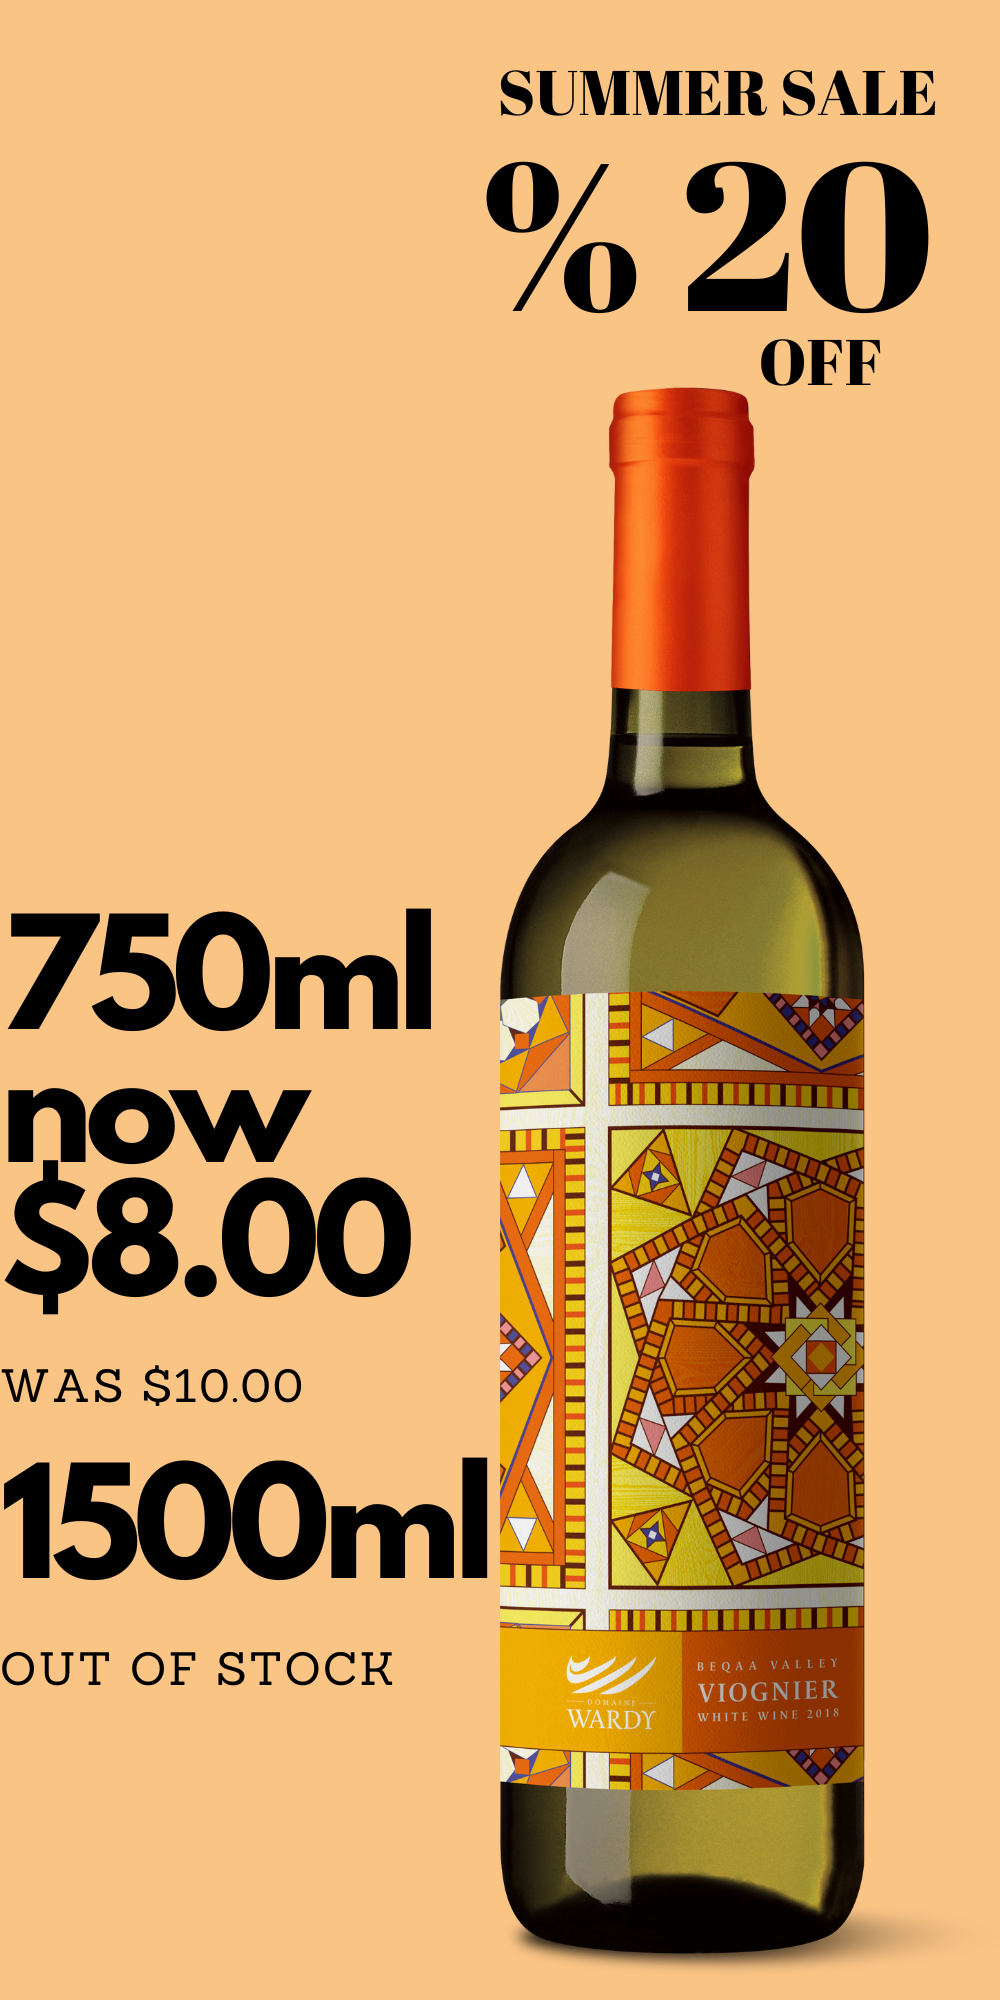 <b>Viognier 2018 <br><font color=red>Summer Sale</font><br></b><small>750ml, & 1500ml</small>